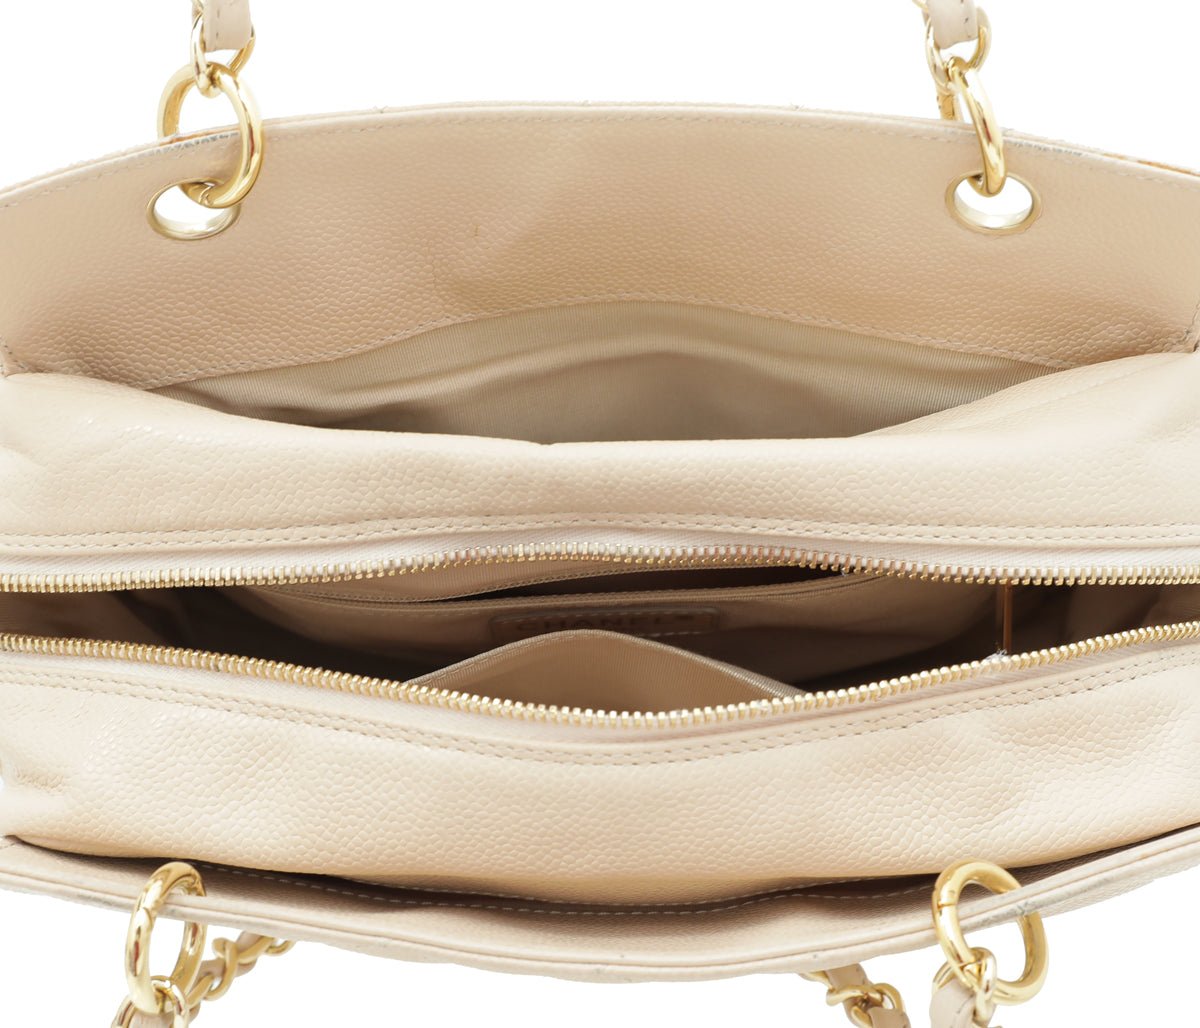 Chanel - Chanel Beige Petite Shopping Tote (PST) Bag | The Closet